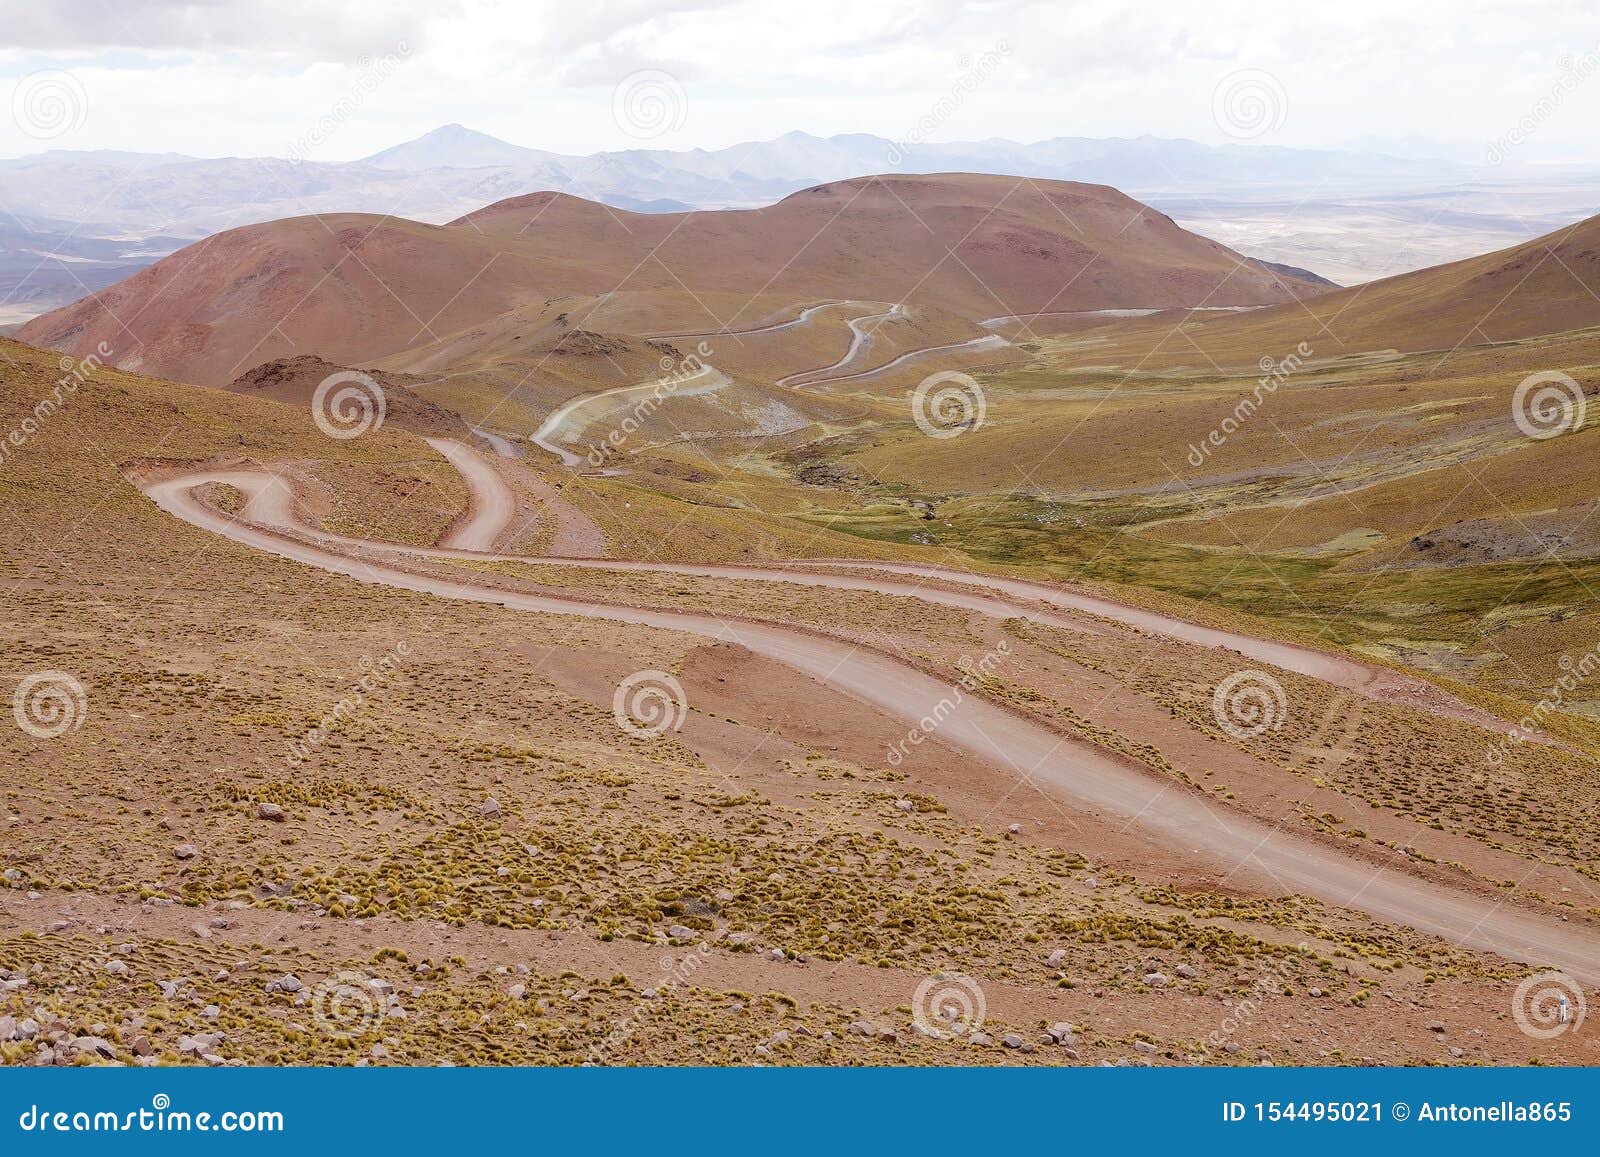 landscape along the national route 40 also known as ruta 40, argentina